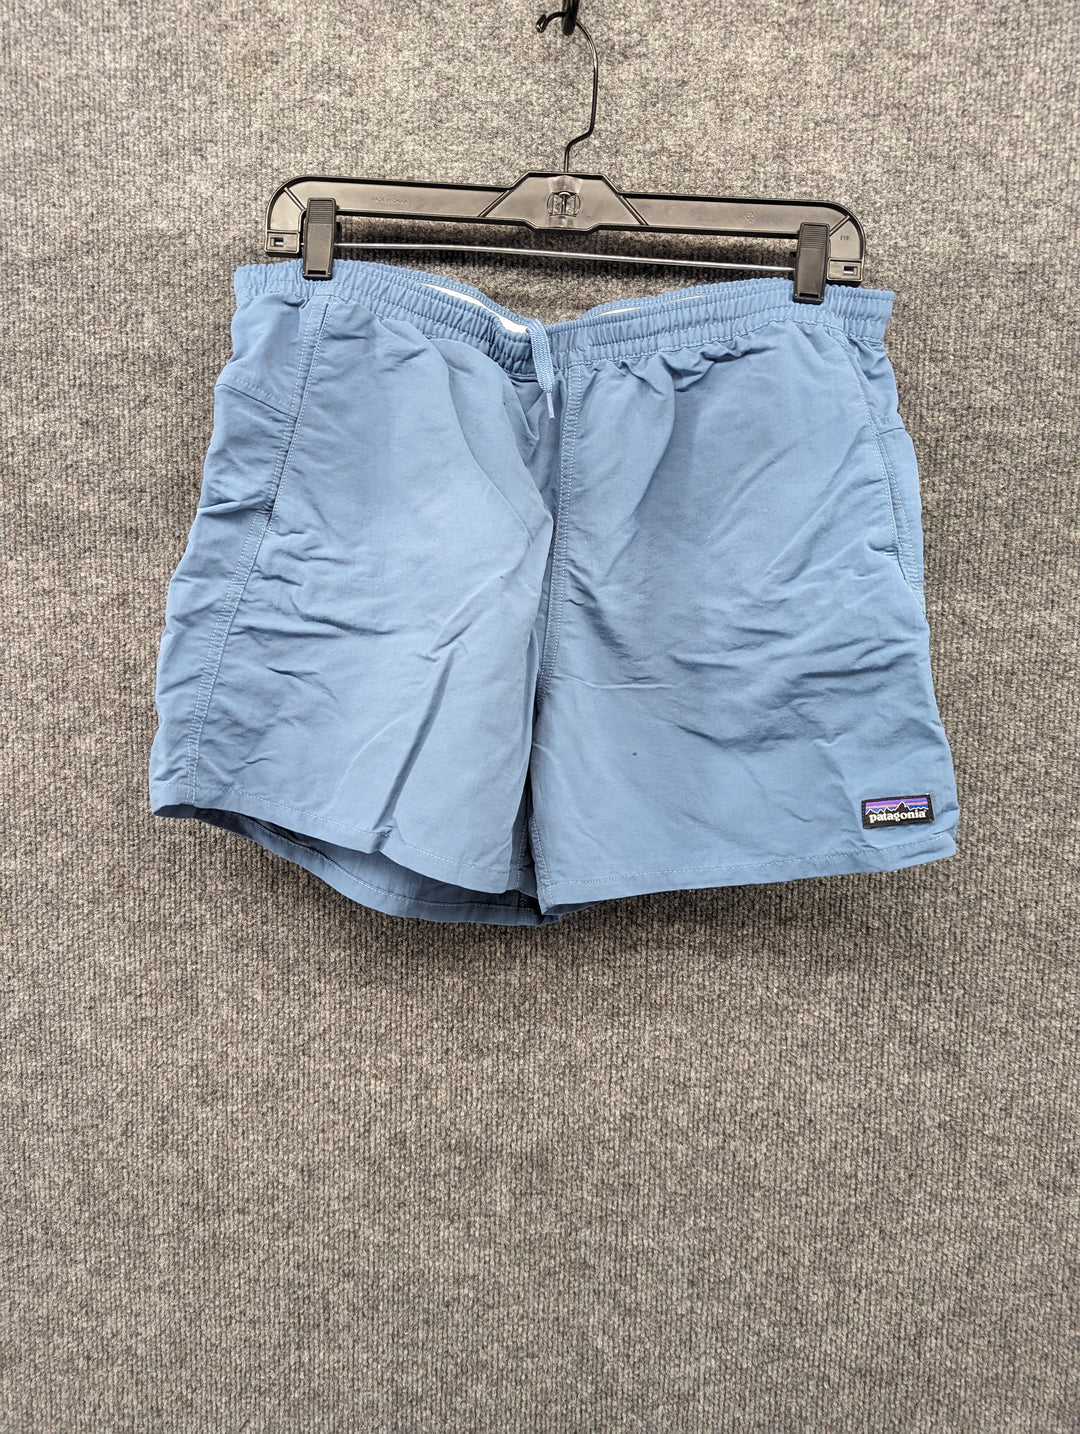 Patagonia Size W Large Women's Active Shorts